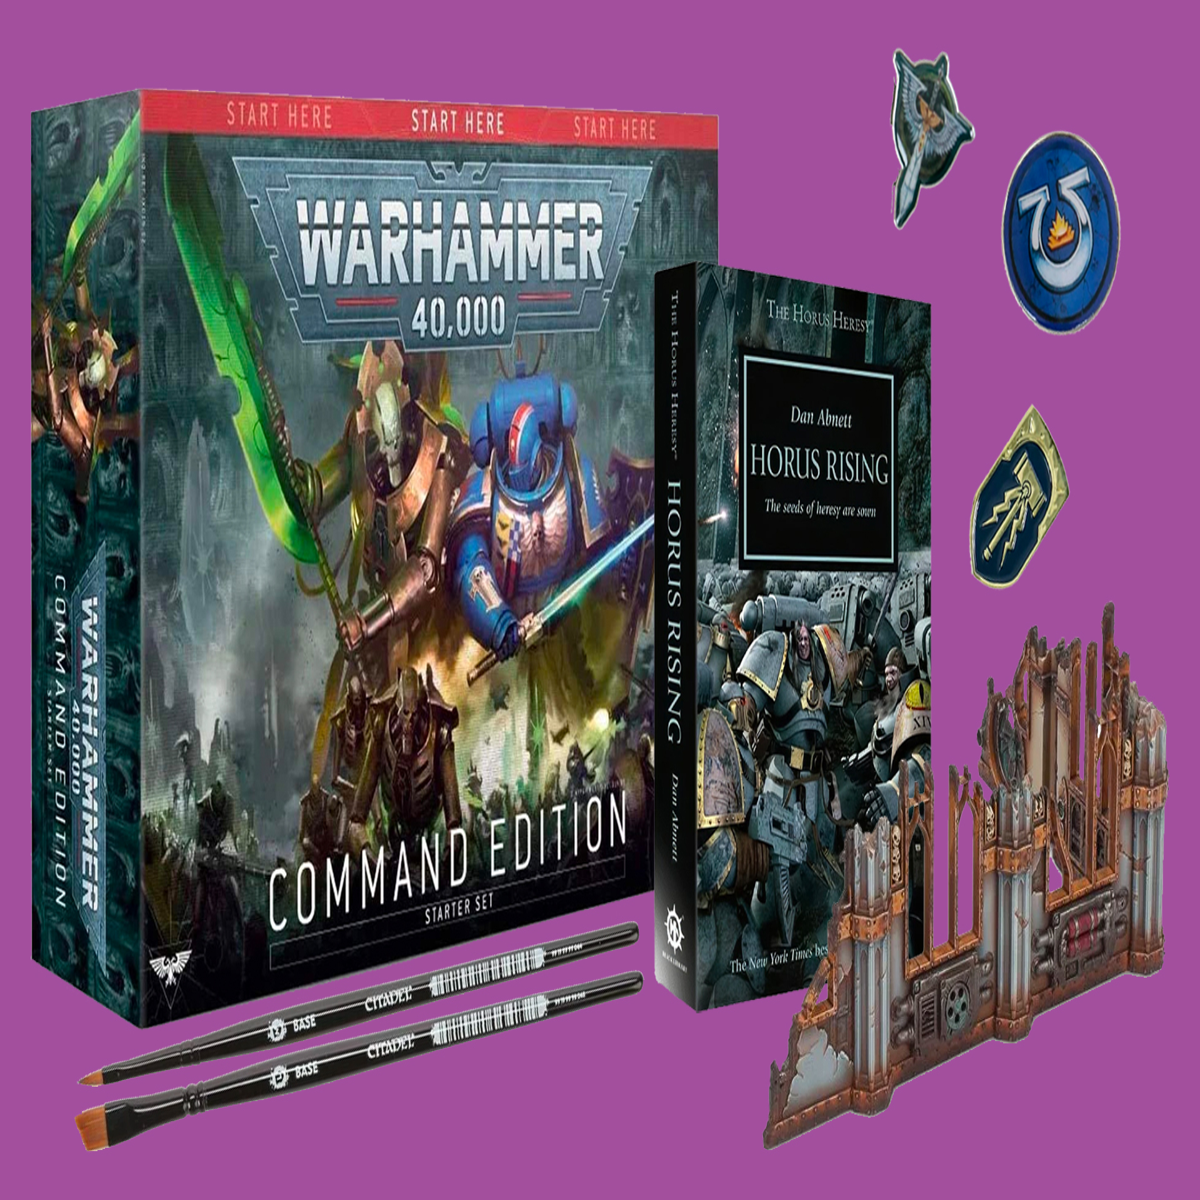 Five Gifts For The Hobbyists In Your Life Warhammer, 41% OFF